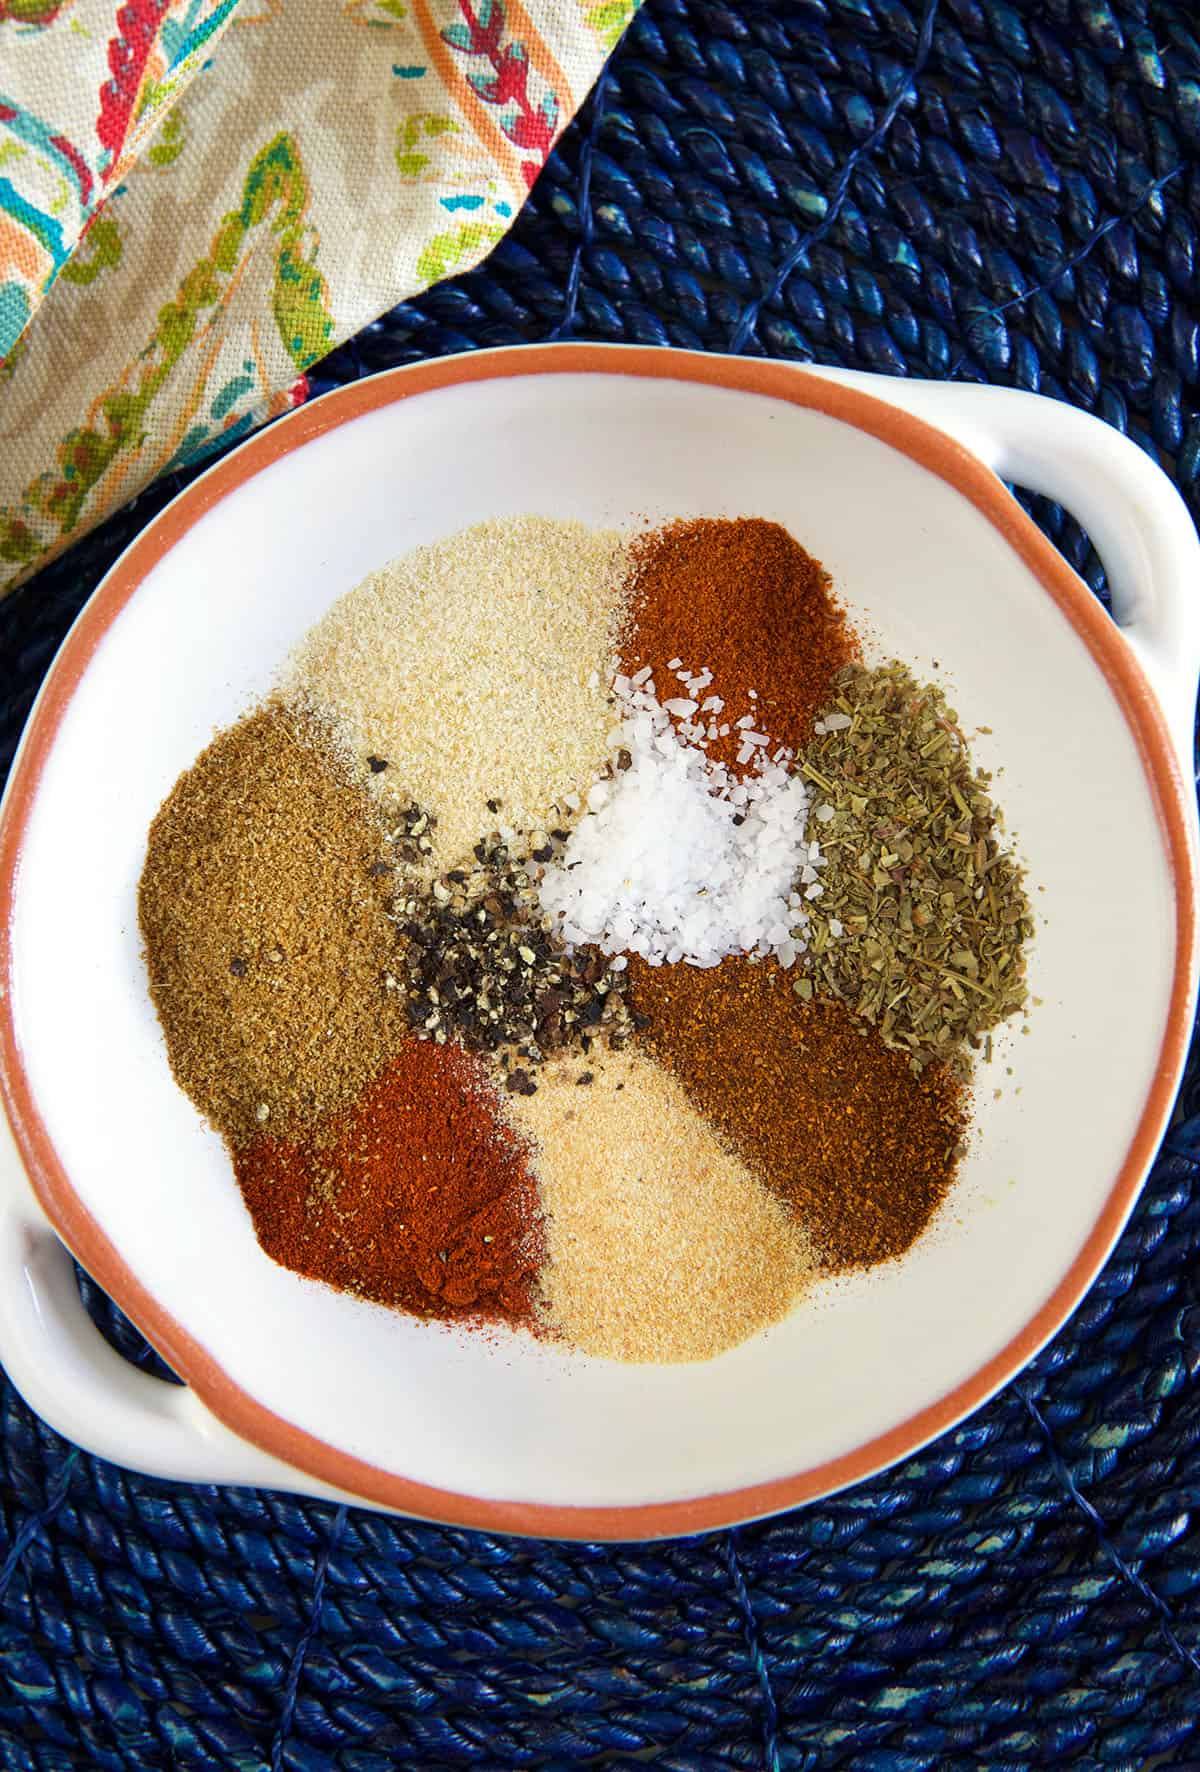 The ingredients for chili seasoning are placed next to each other in a white bowl.